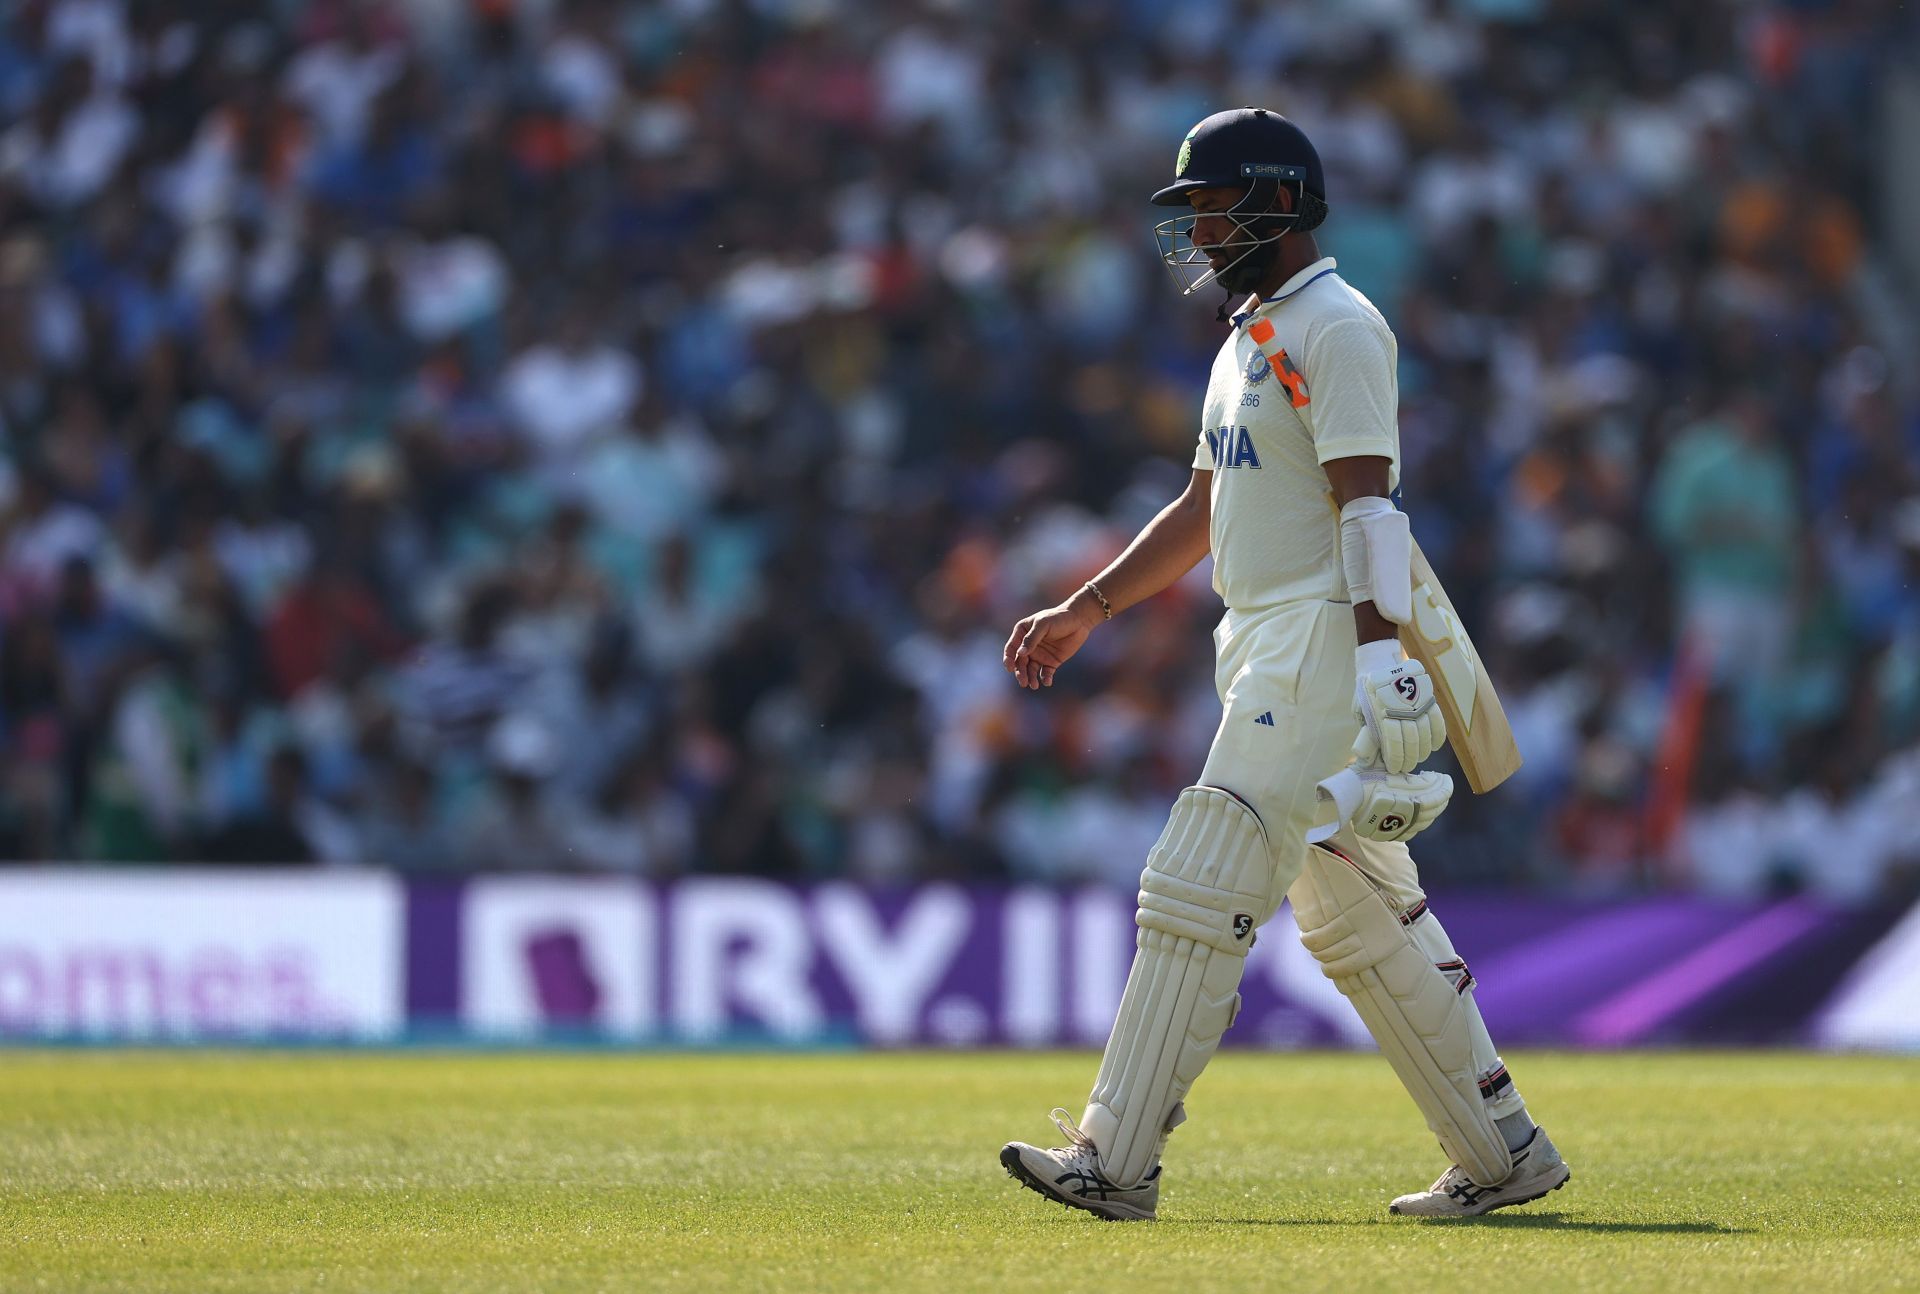 Is this the end of the road for Pujara?